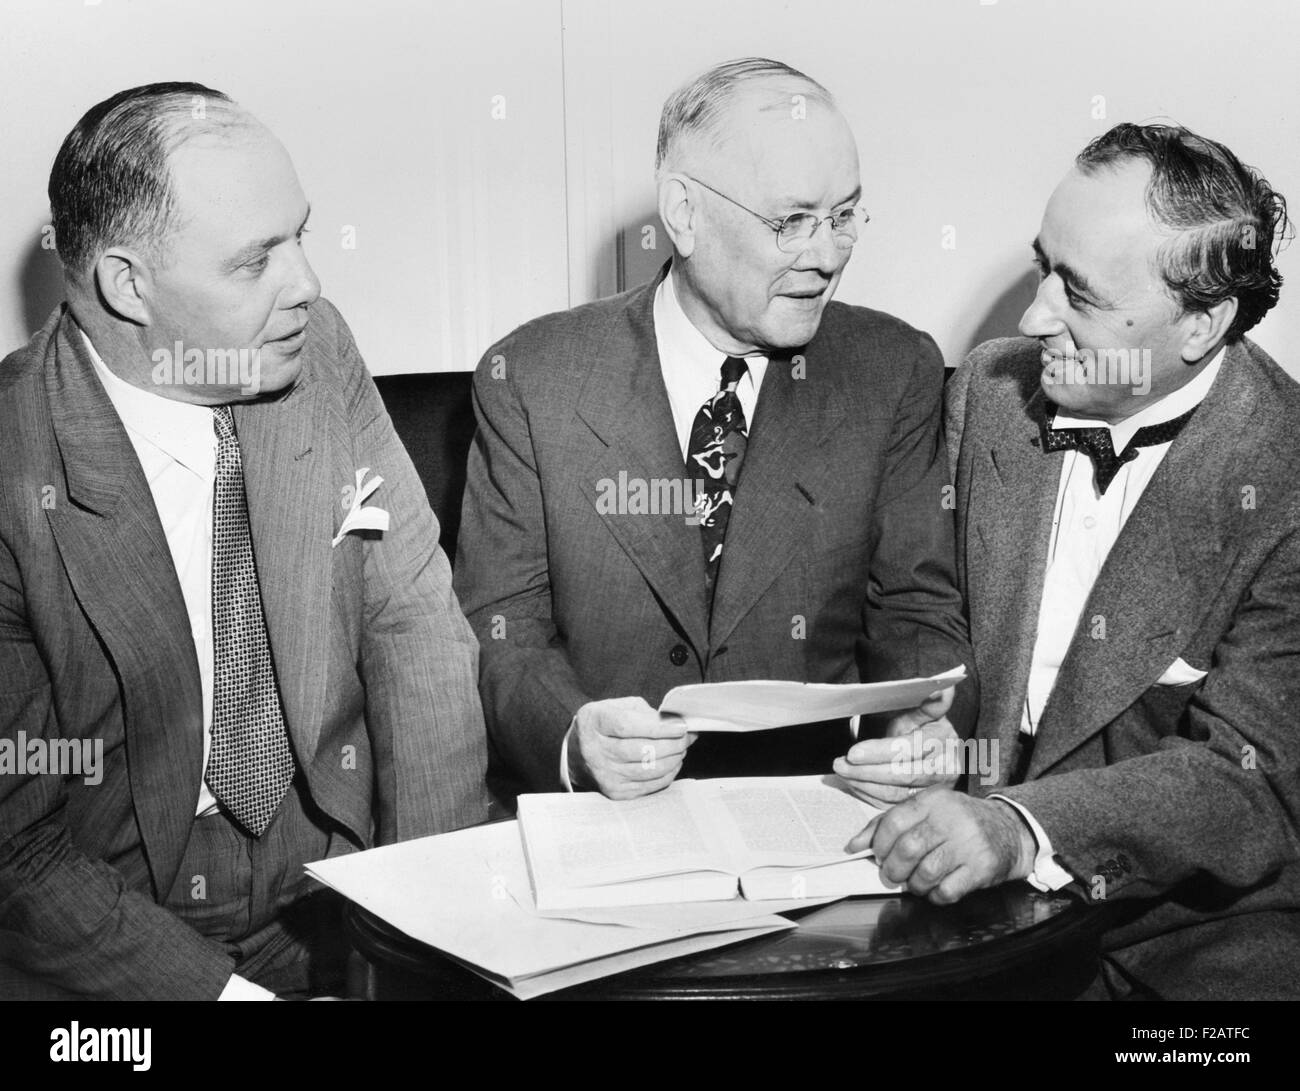 American Federation of Labor's Executive Council, August 9, 1943. L-R: George Meany, William Green, and Matthew Woll. Looking toward the Postwar labor issues, they were concerned about restoration of jobs and seniority to returning servicemen. (CSU 2015 11 1658) Stock Photo